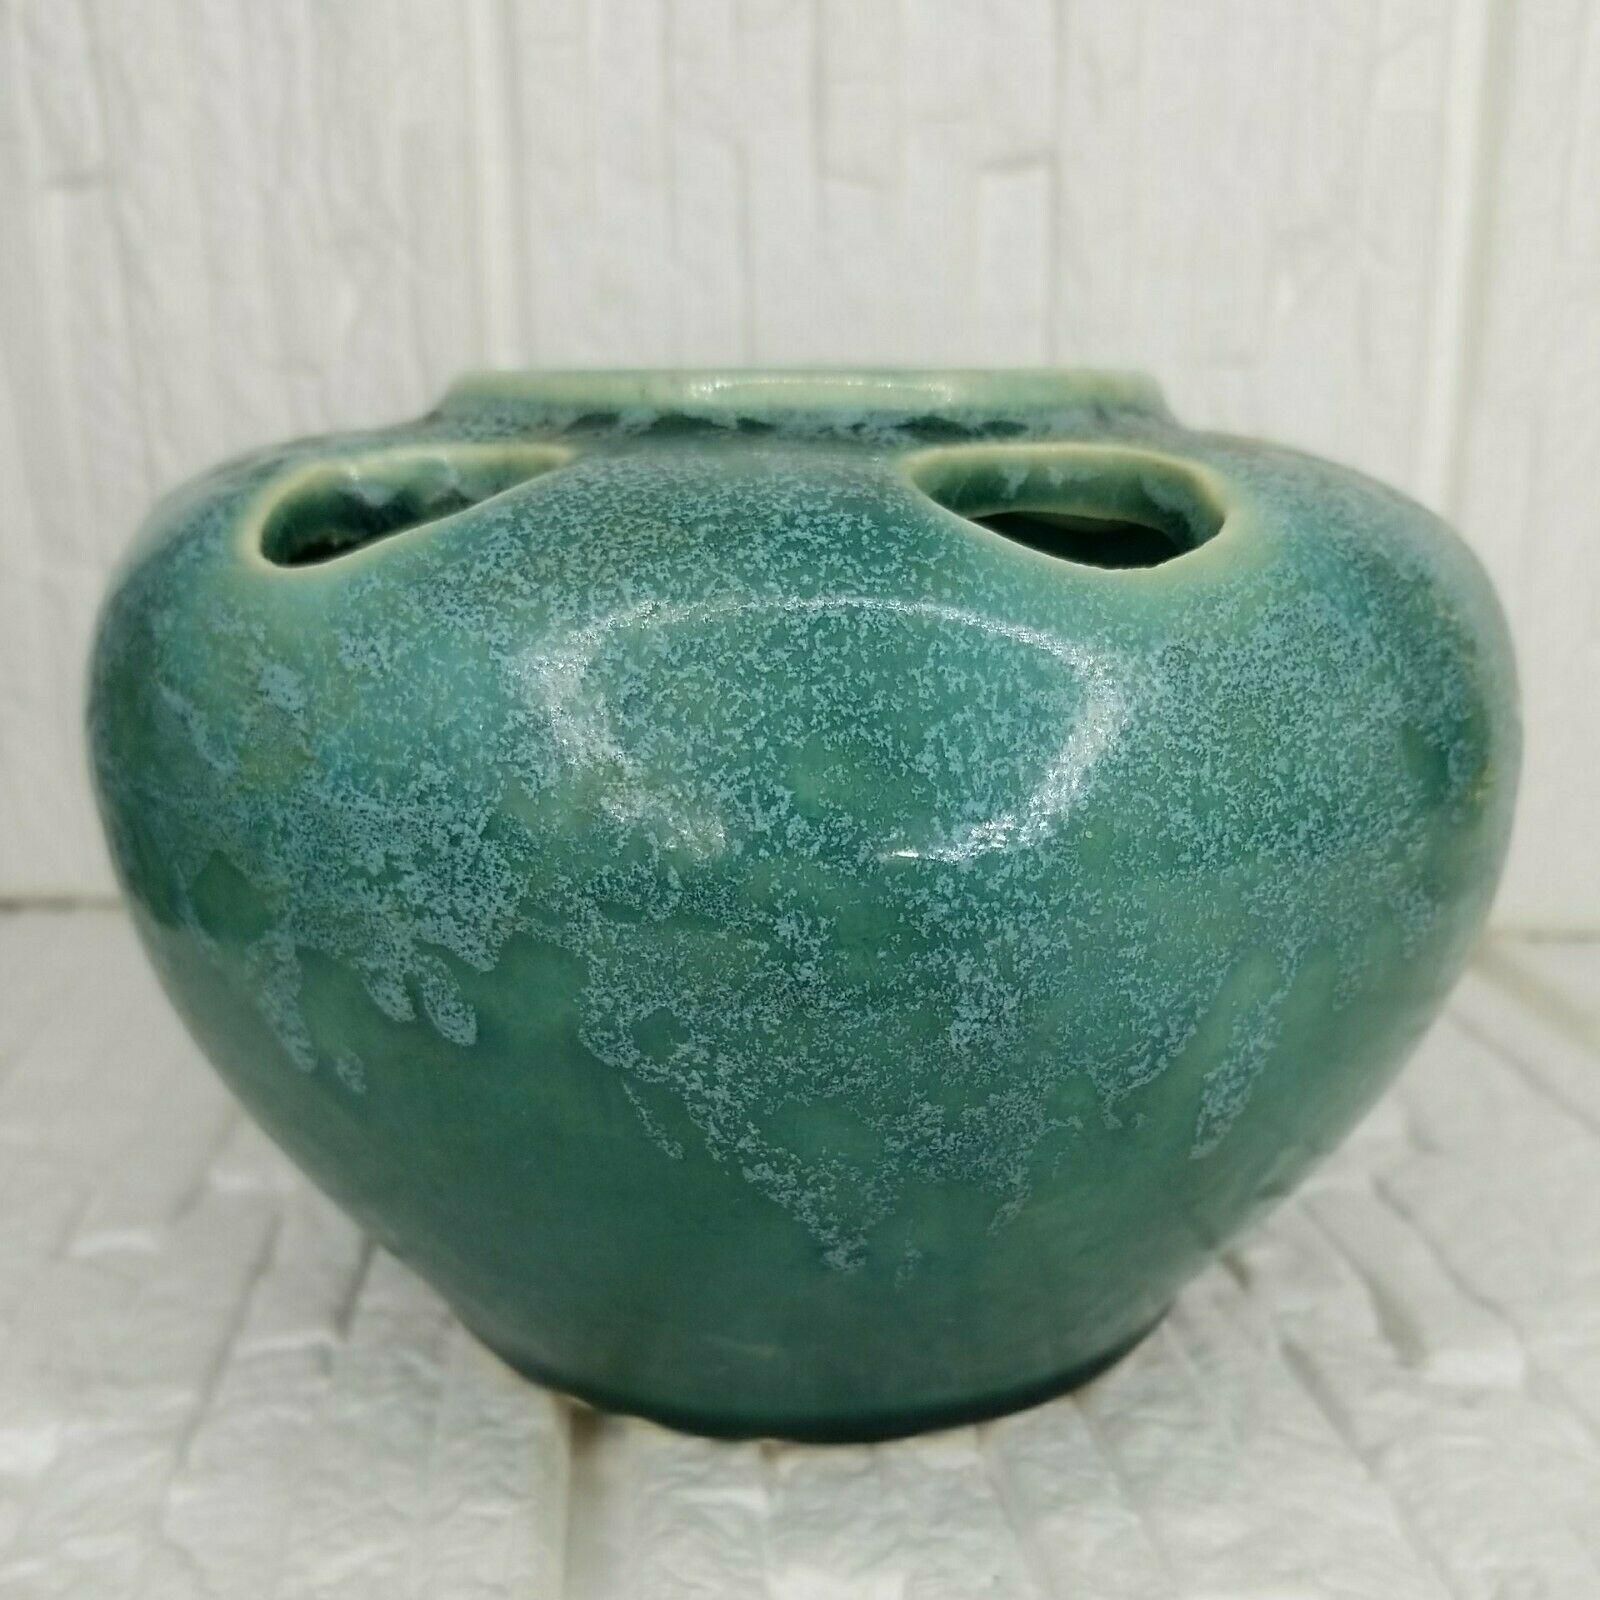 Unusual Mccoy 524 Green Mottled Pottery Bowl With Holes For Floral Arrangement